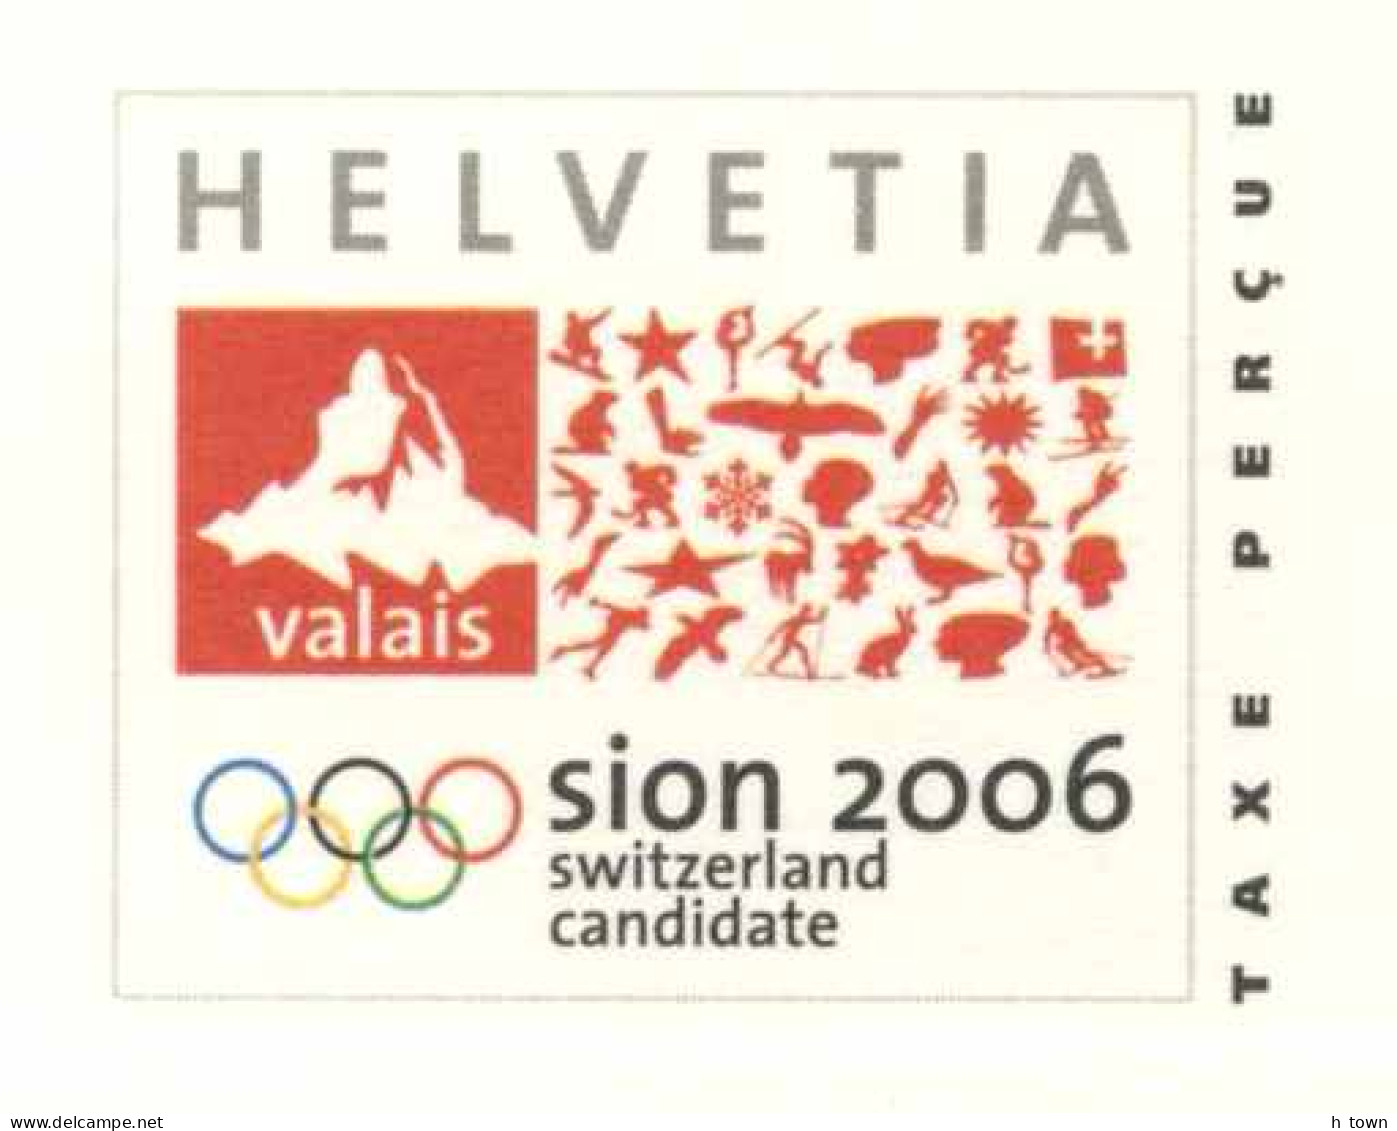 820  Jeux Olympiques Torino: Sion, Ville Candidate - 2006 Winter Olympics Candidate: Sion, Switzerland. Tennis Fed Cup - Winter 2006: Turin